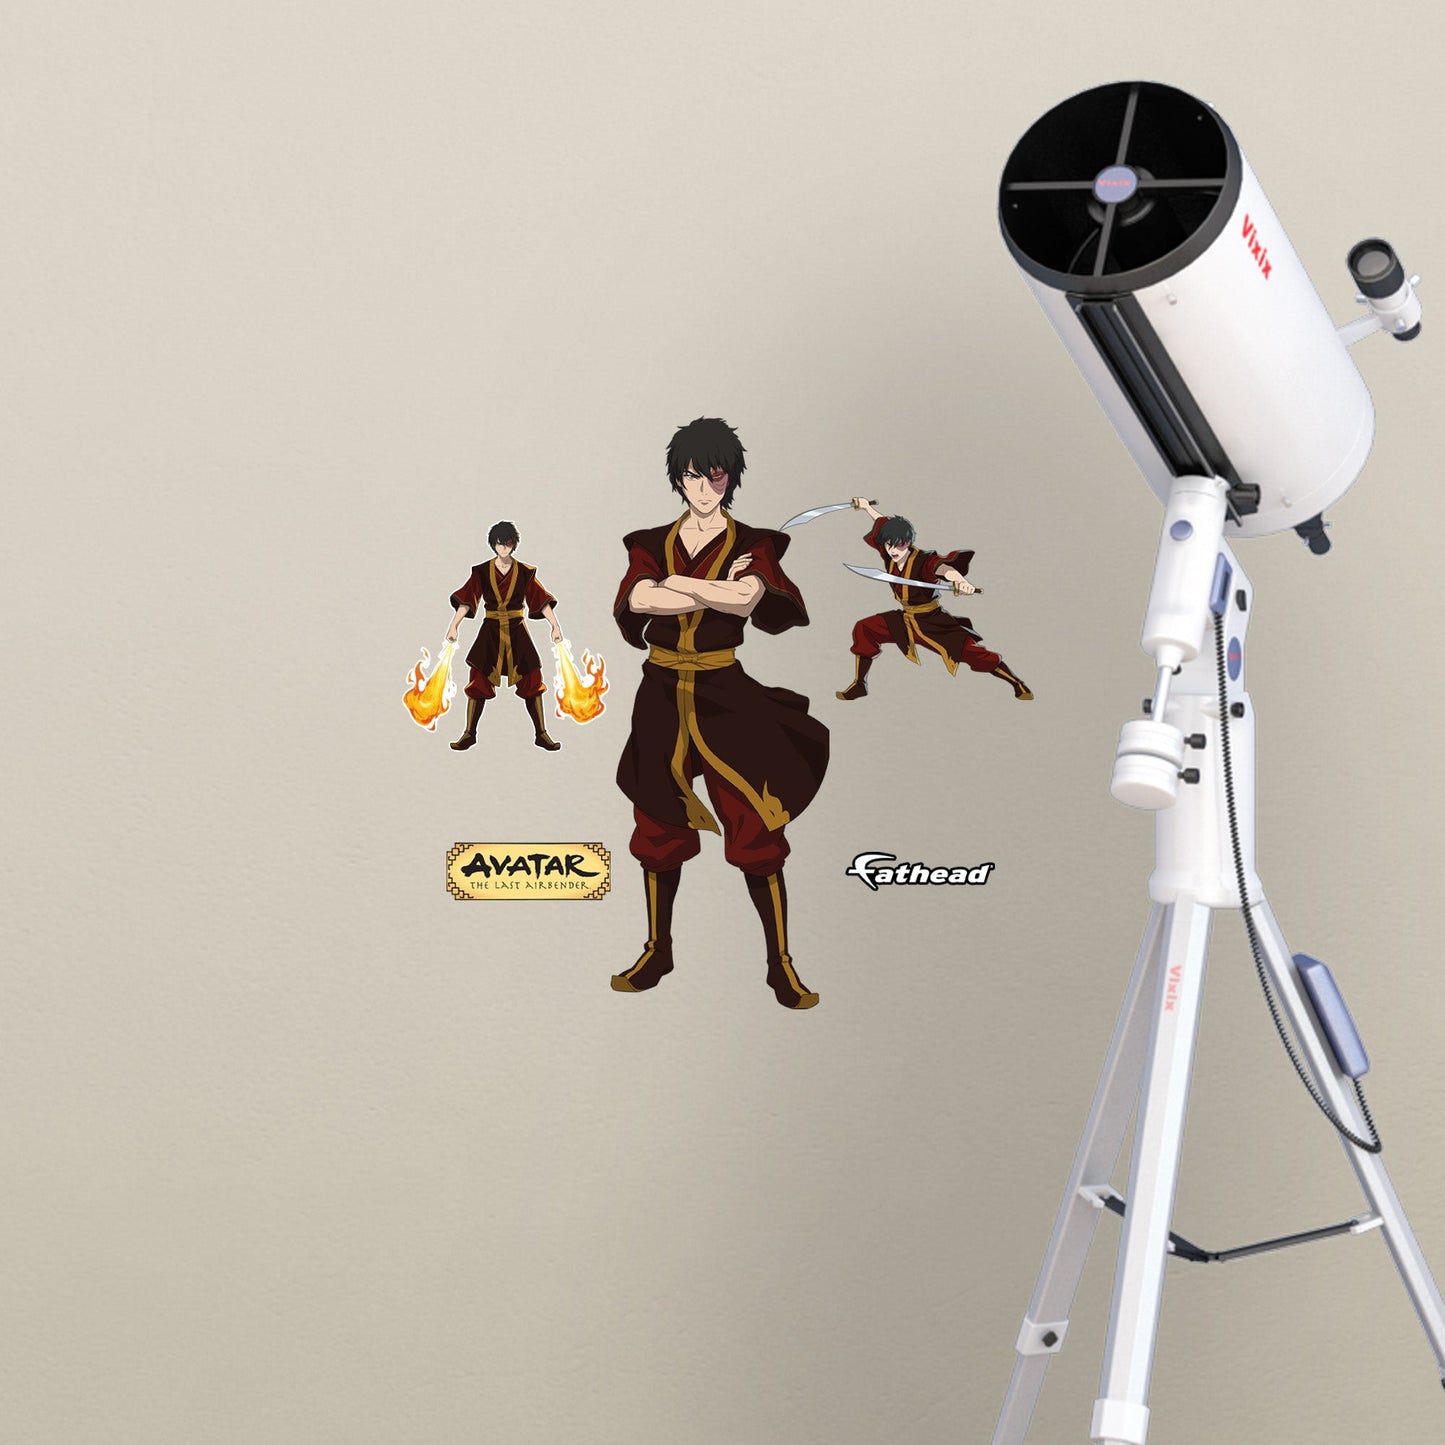 Avatar The Last Airbender: Zuko RealBigs        - Officially Licensed Nickelodeon Removable     Adhesive Decal